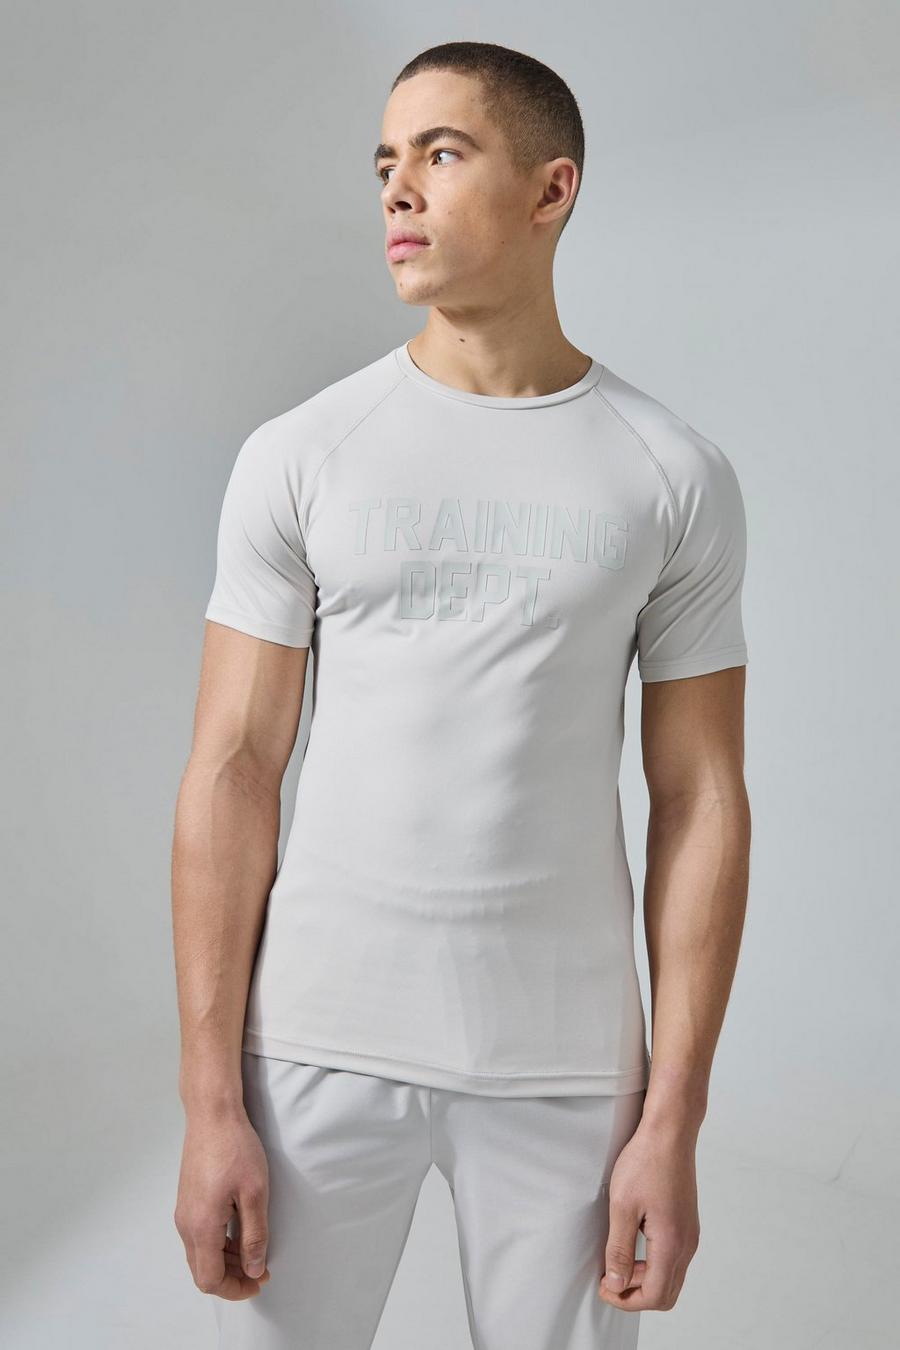 Light grey Active Training Dept Muscle Fit T-shirt